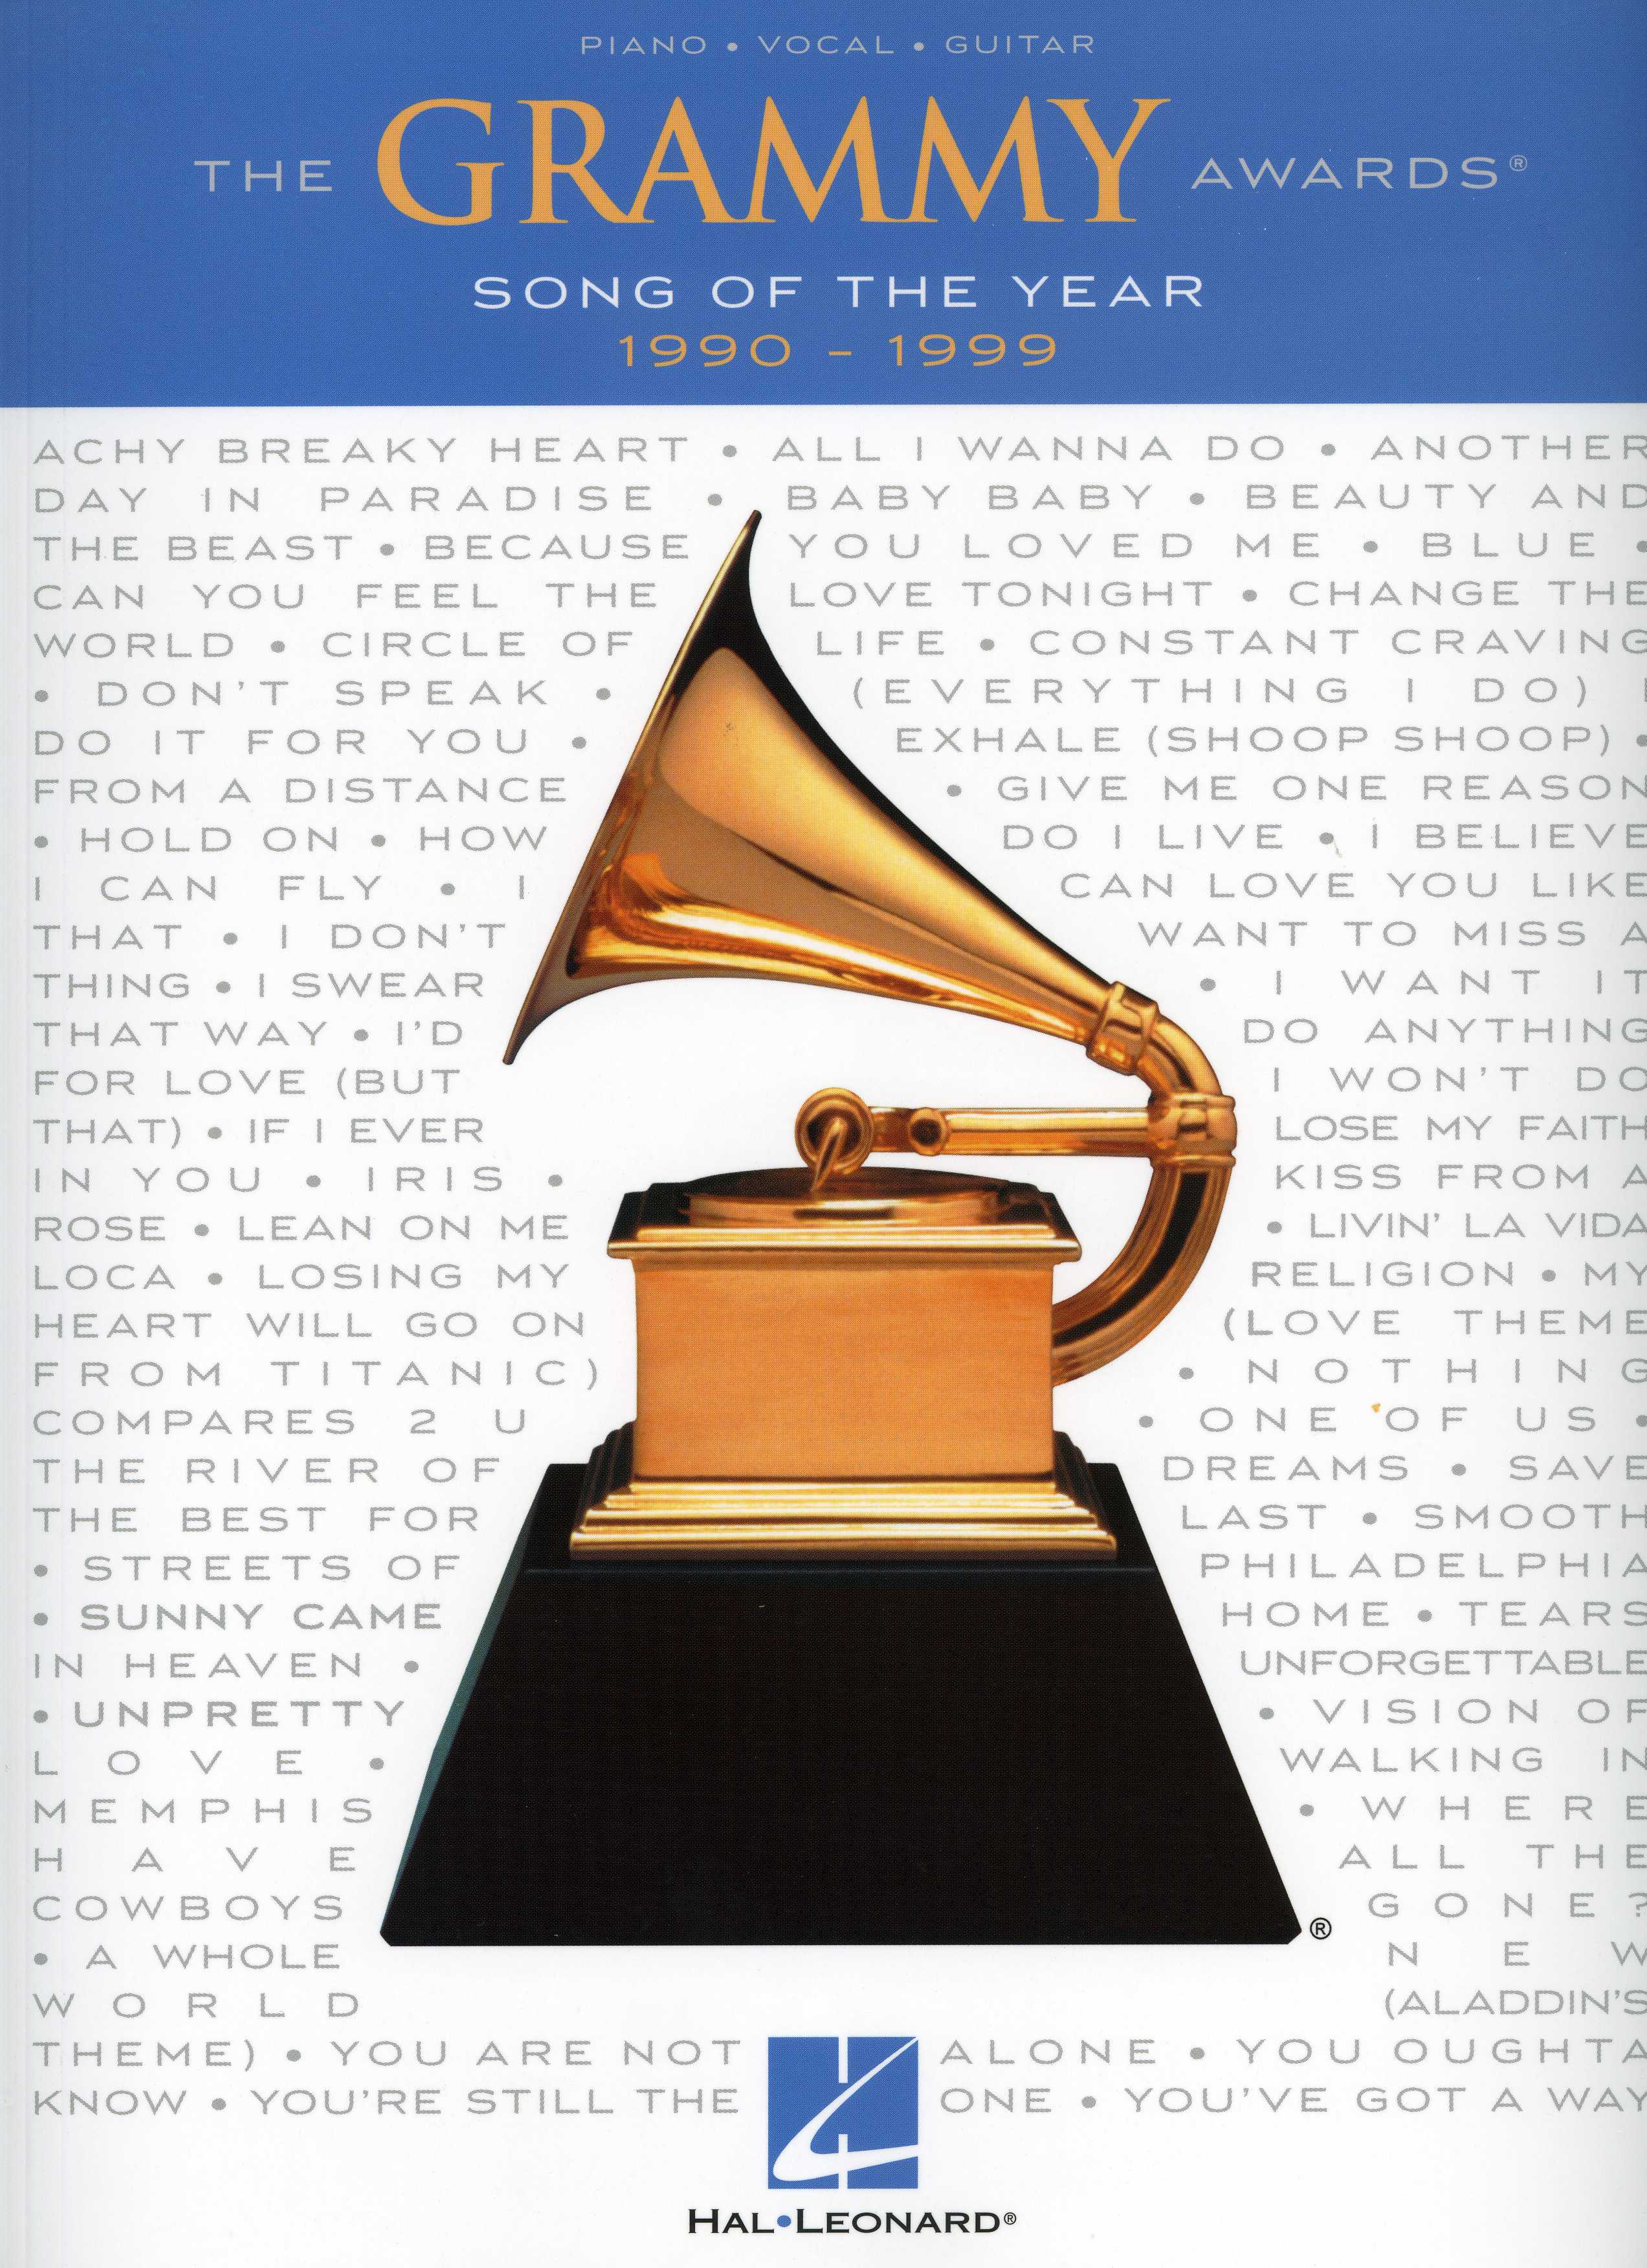 The Grammy Awards Song Of The Year 1990 - 1999